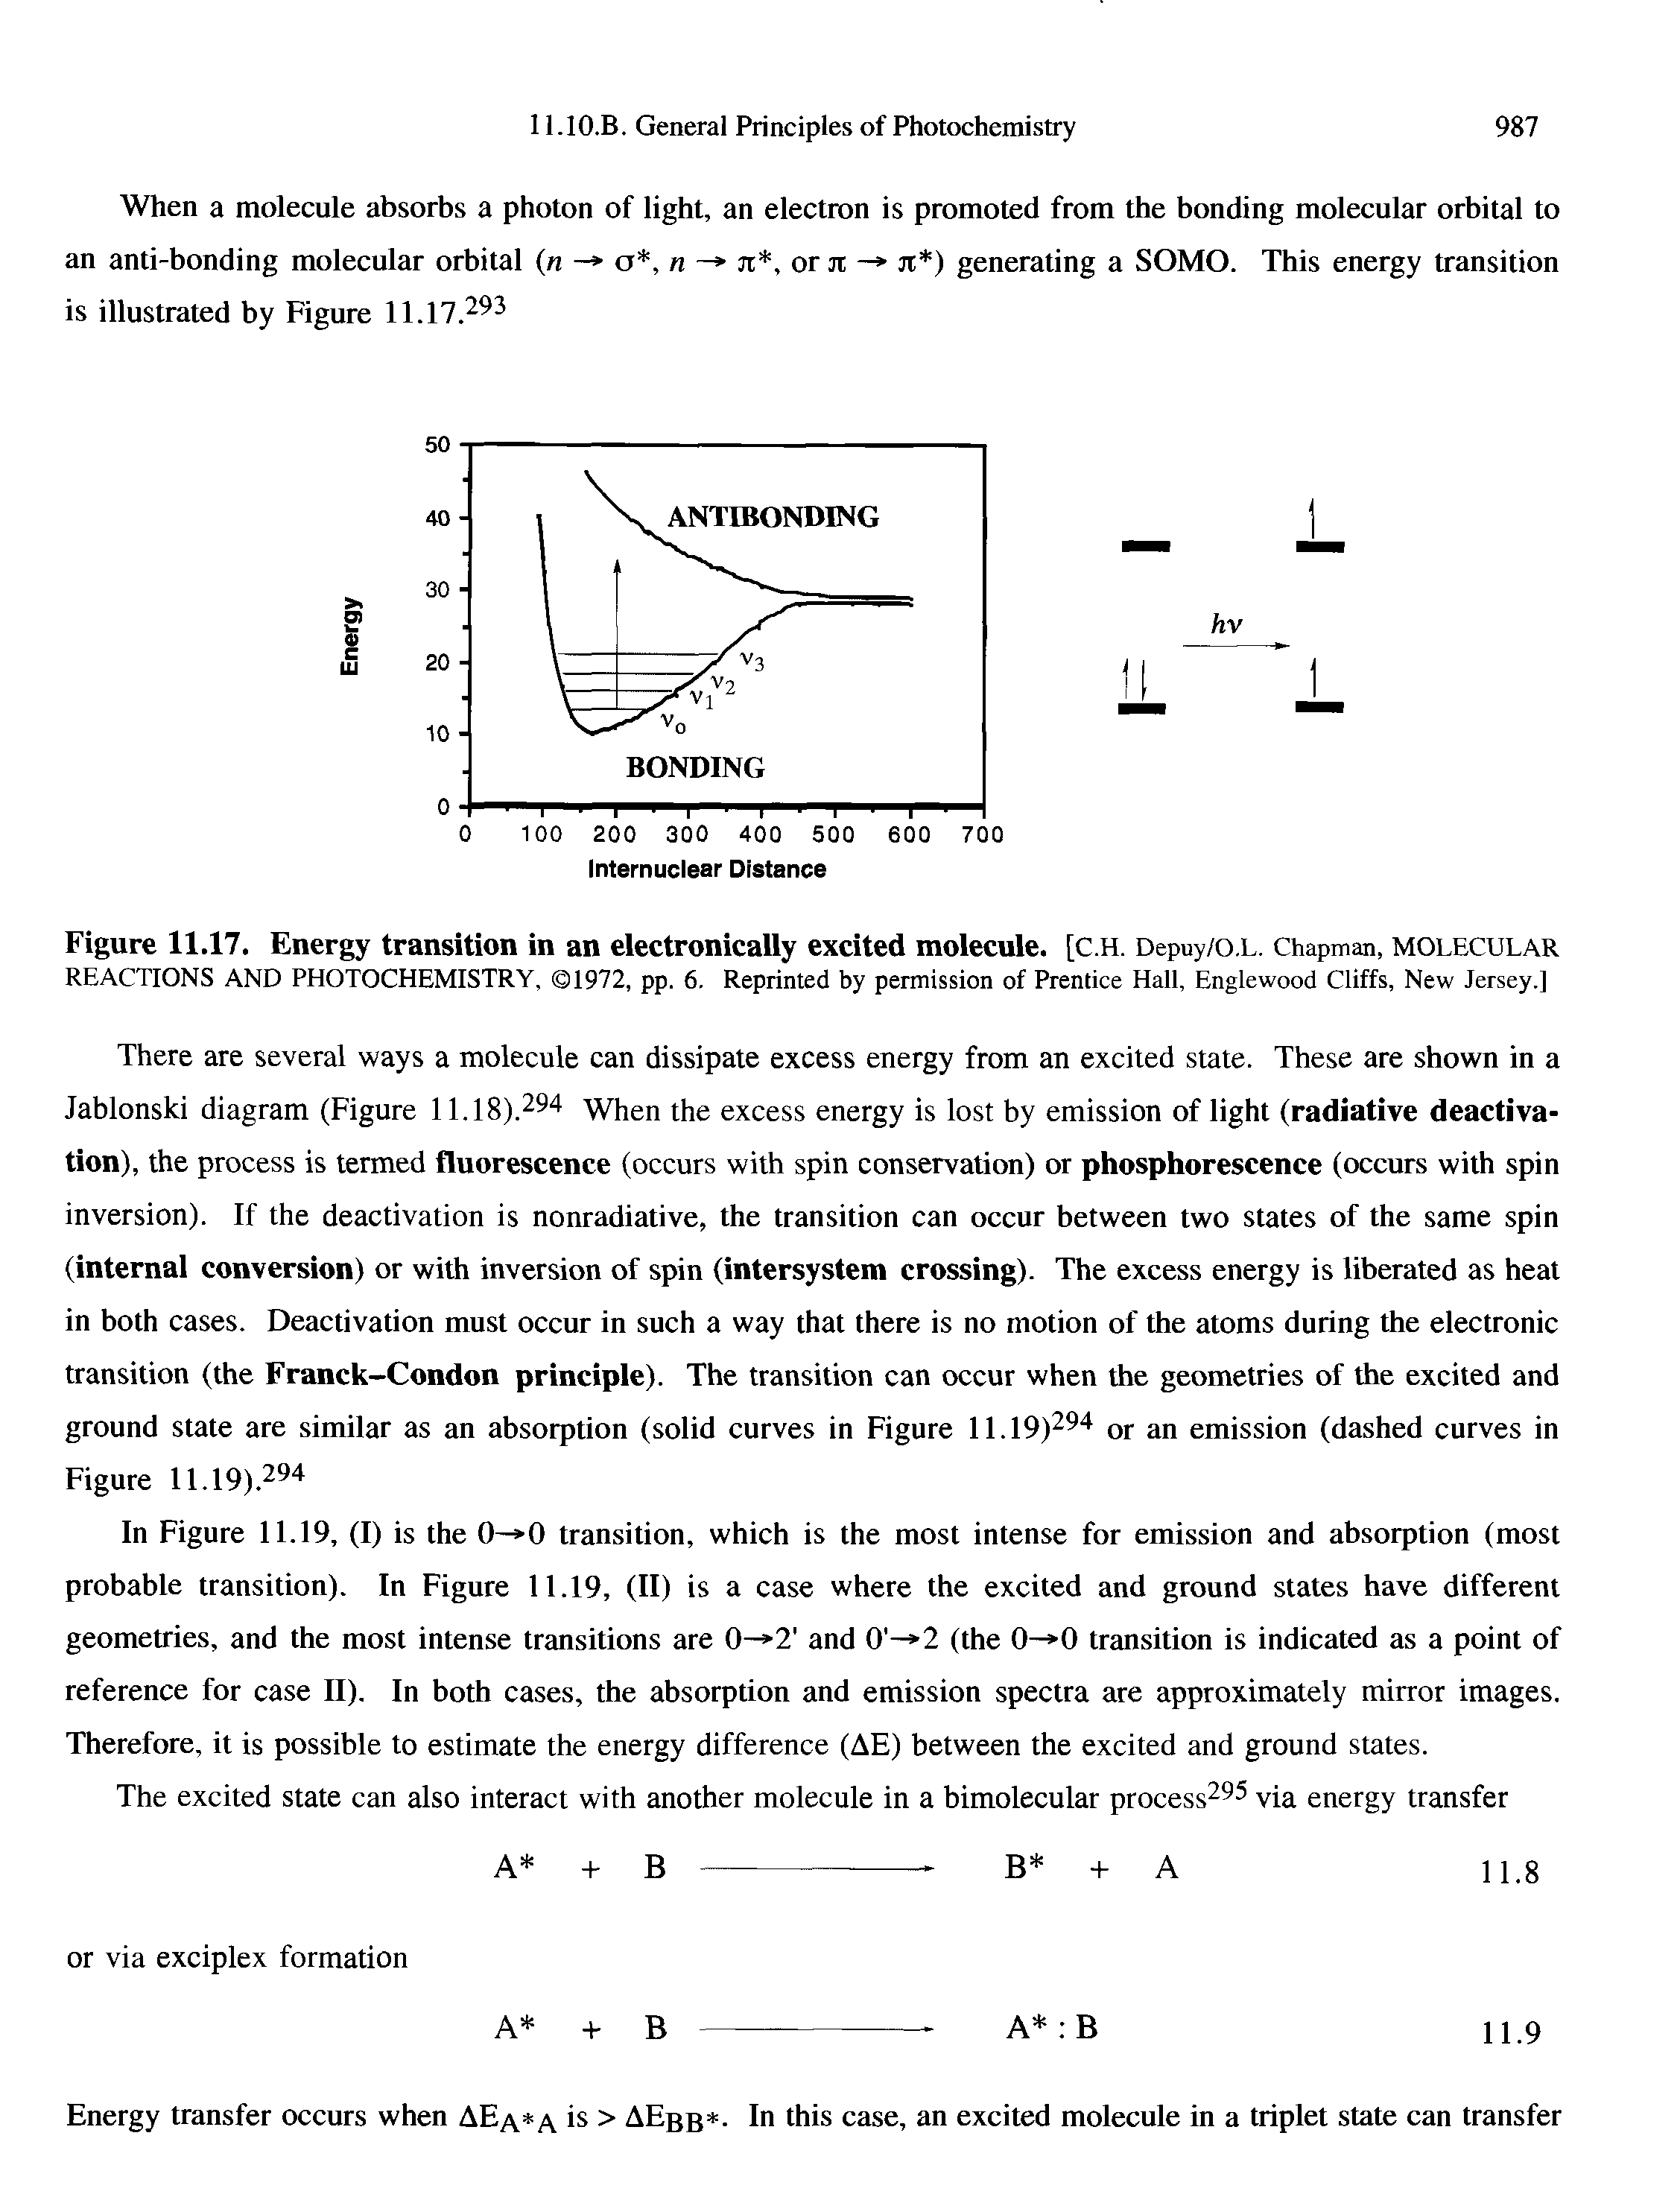 Figure 11.17. Energy transition in an electronically excited molecule. [C.H. Depuy/o.L. Chapman, molecular REACTIONS AND PHOTOCHEMISTRY, 1972, pp. 6. Reprinted by permission of Prentice Hall, Englewood Cliffs, New Jersey.]...